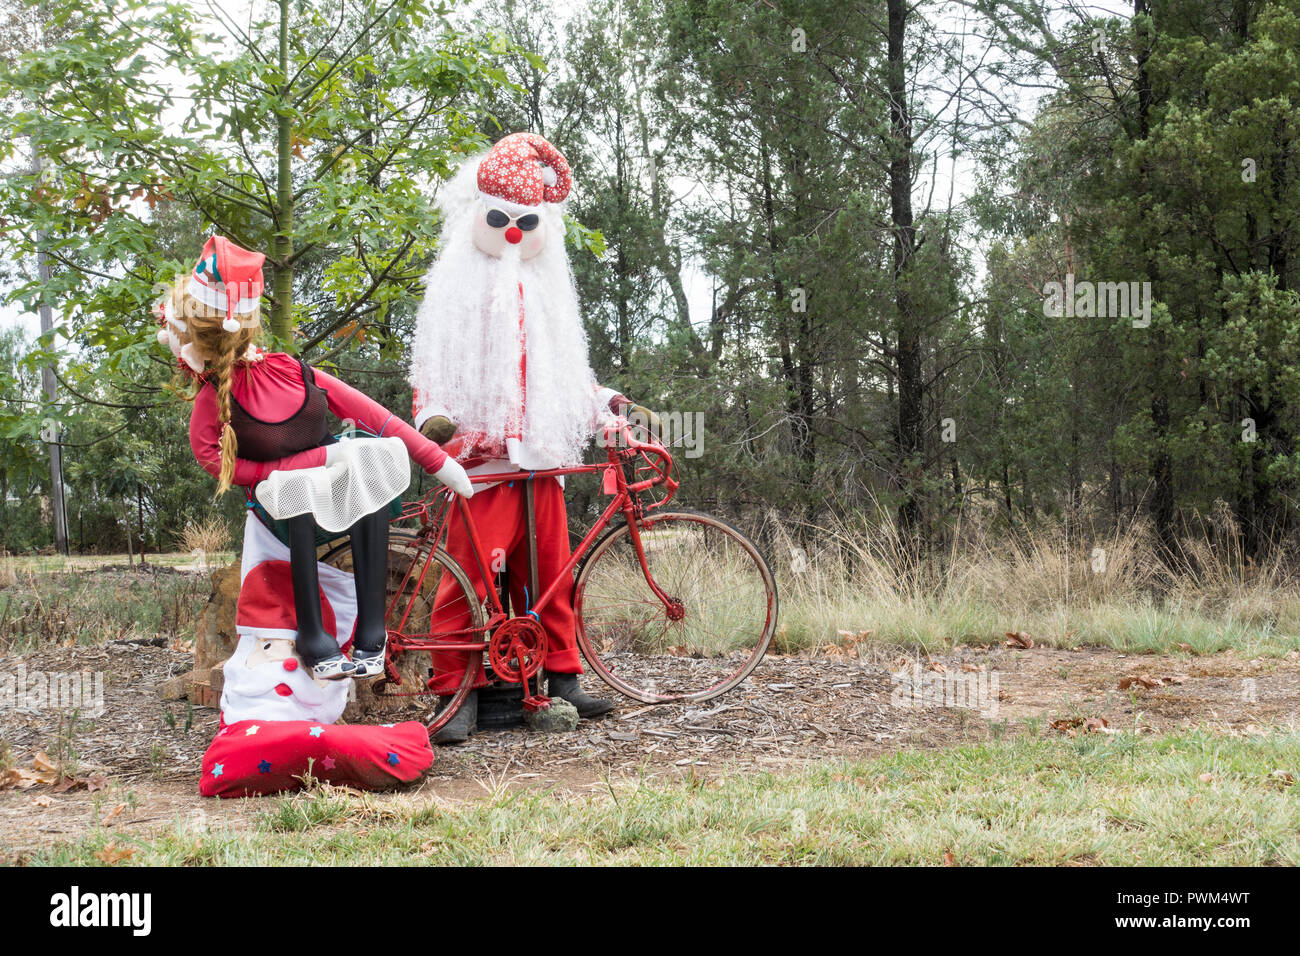 Christmas decoration at front of a rural property in NSW Australia. Stock Photo